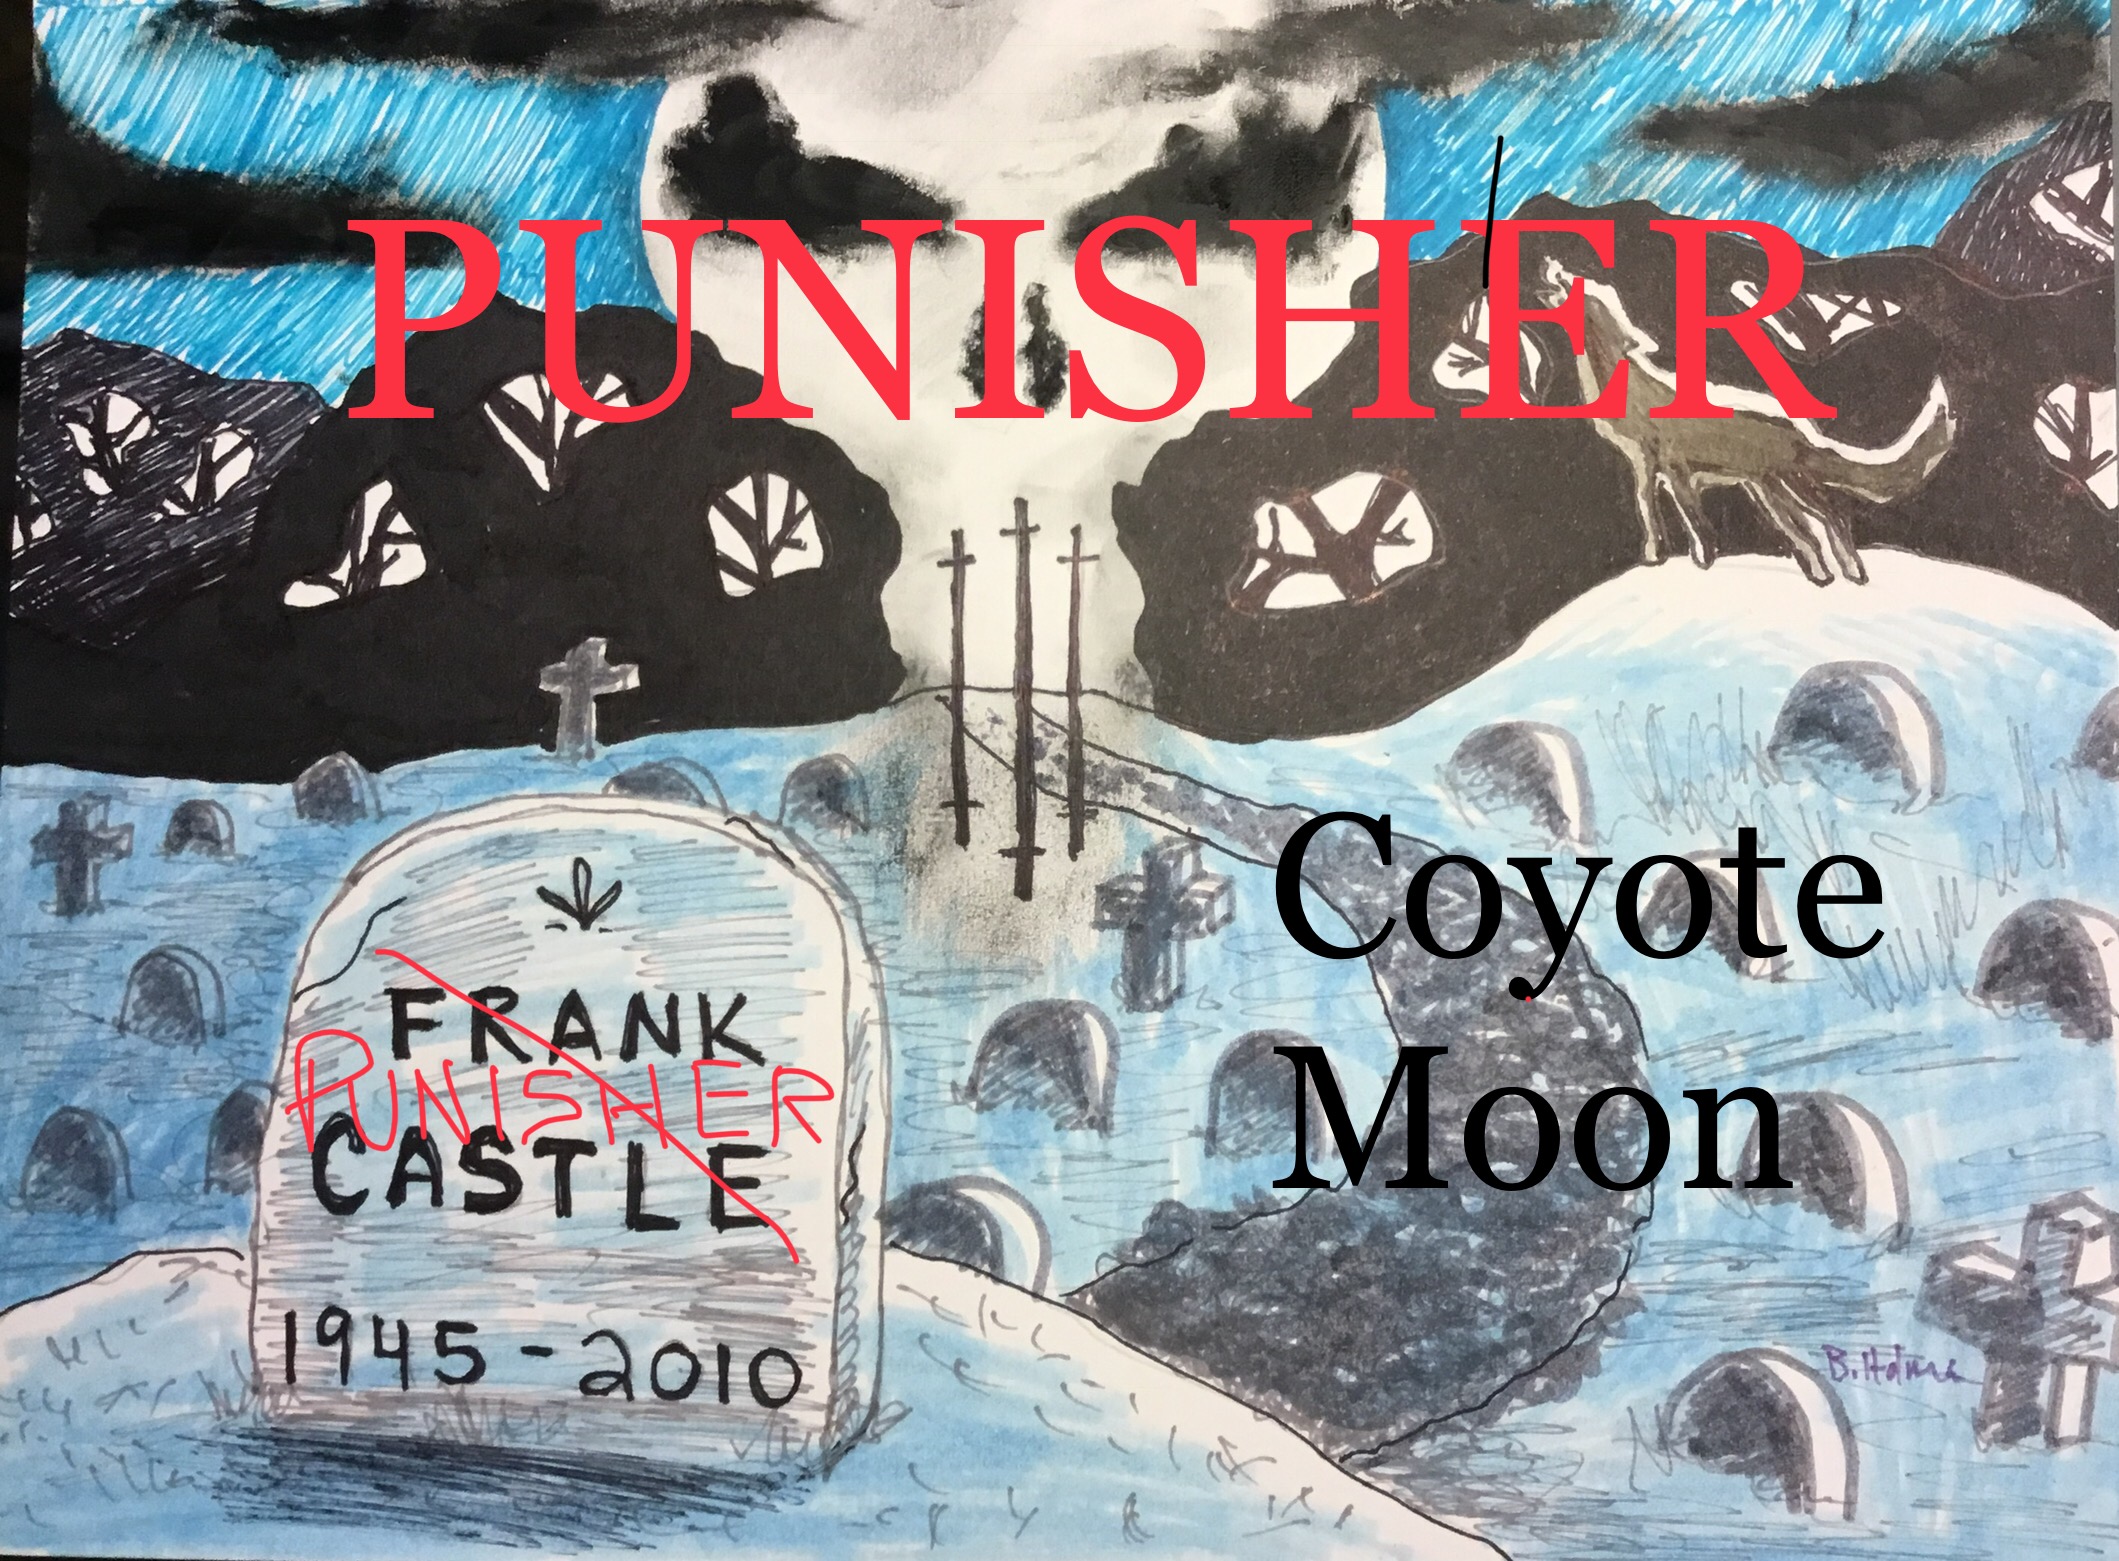 The punisher, fan fiction, coyote moon